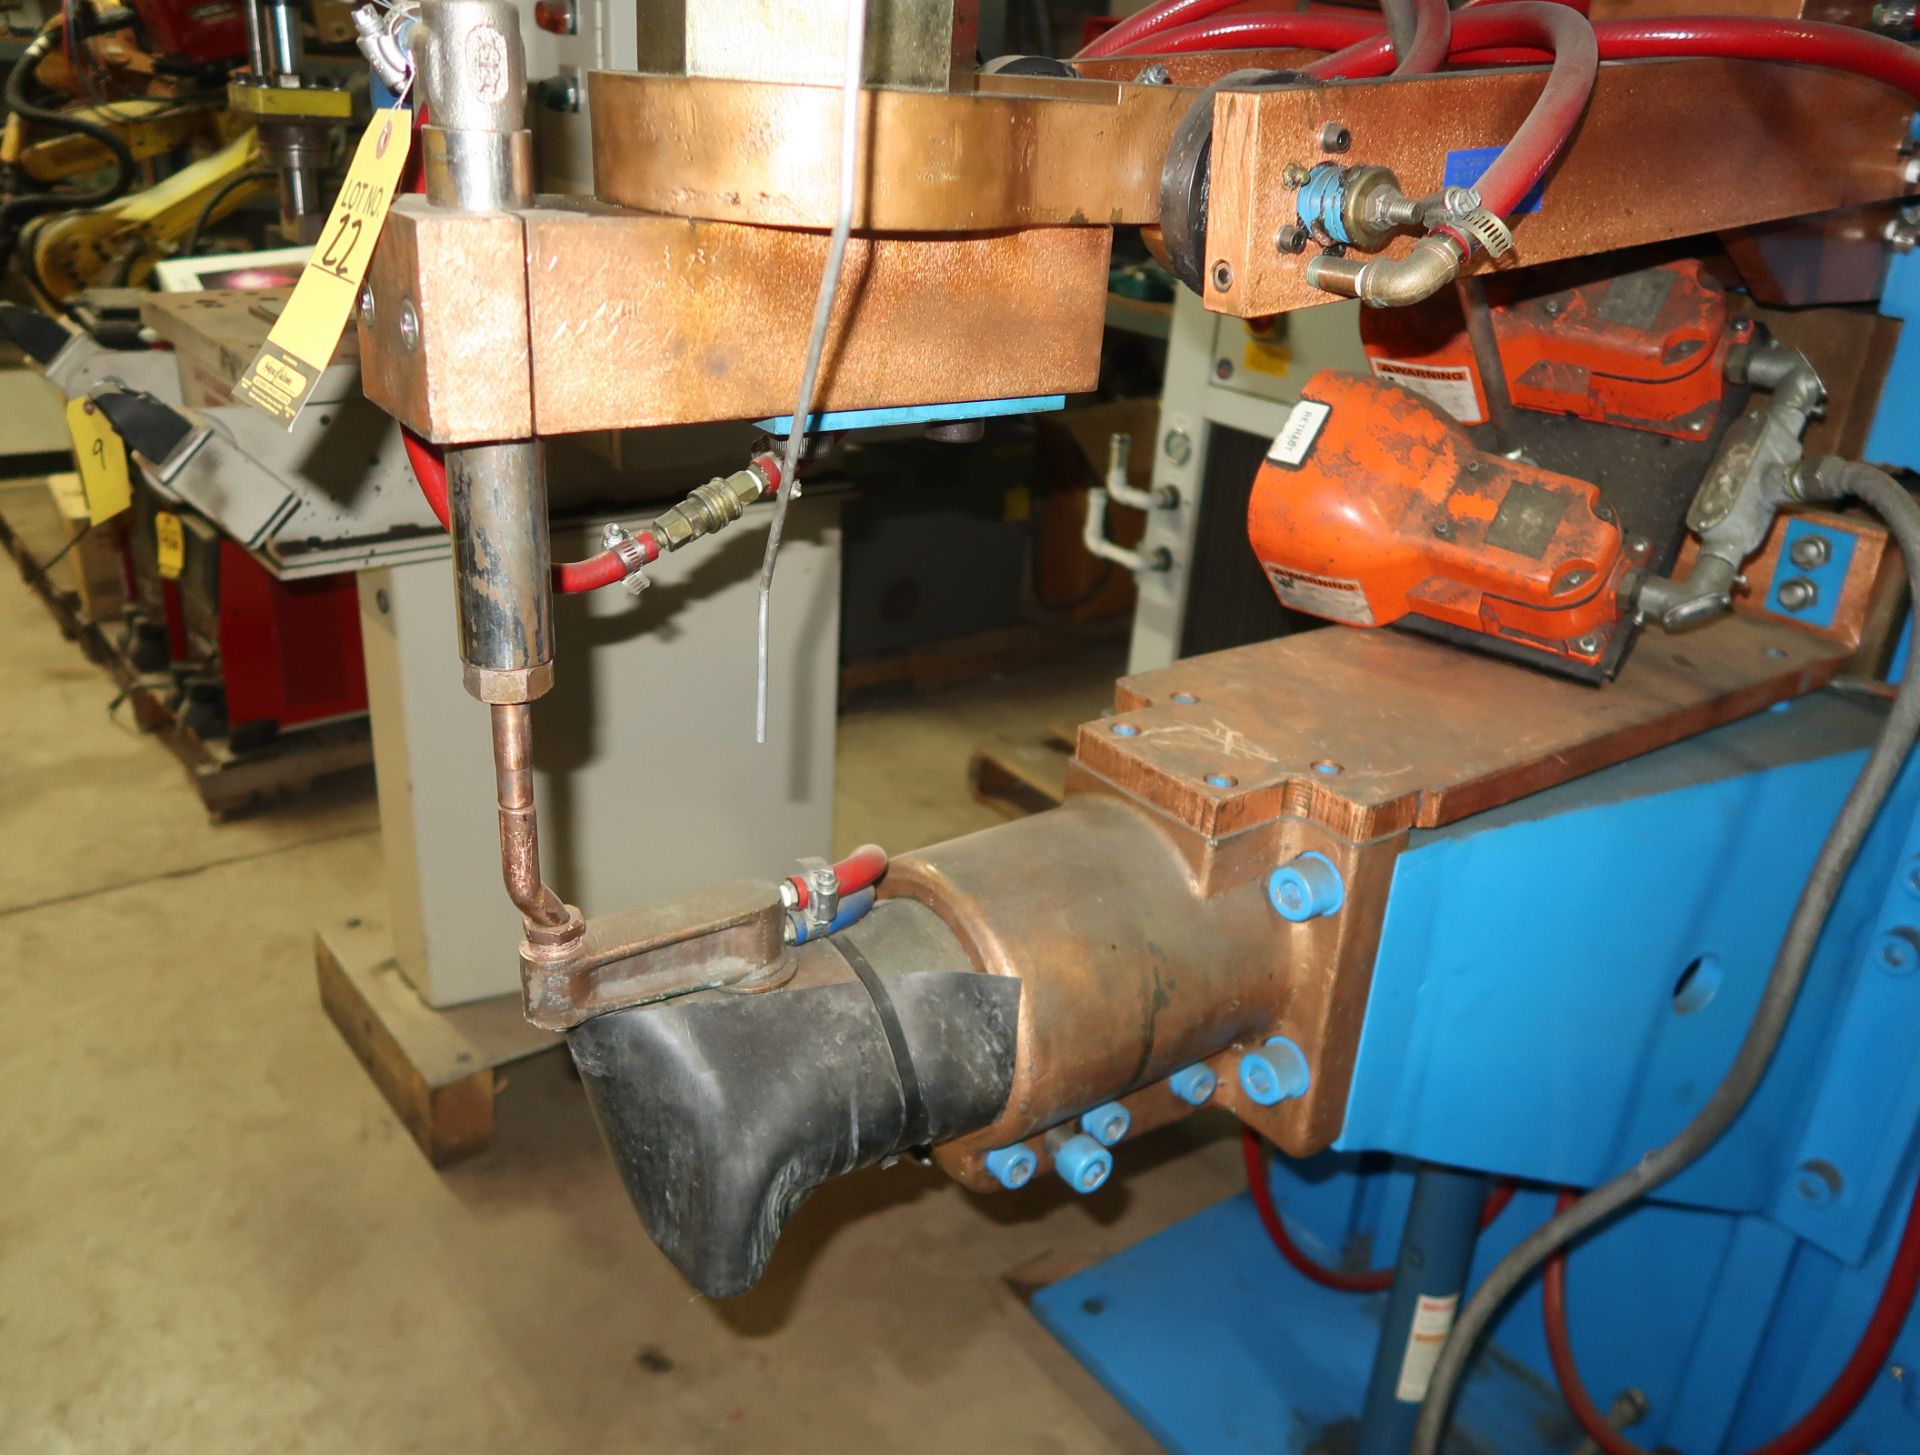 SCIAKY 3 PHASE 200KVA SPOT WELDER MDL. PMC04STM-200-36 SN. 7419R - Image 5 of 7